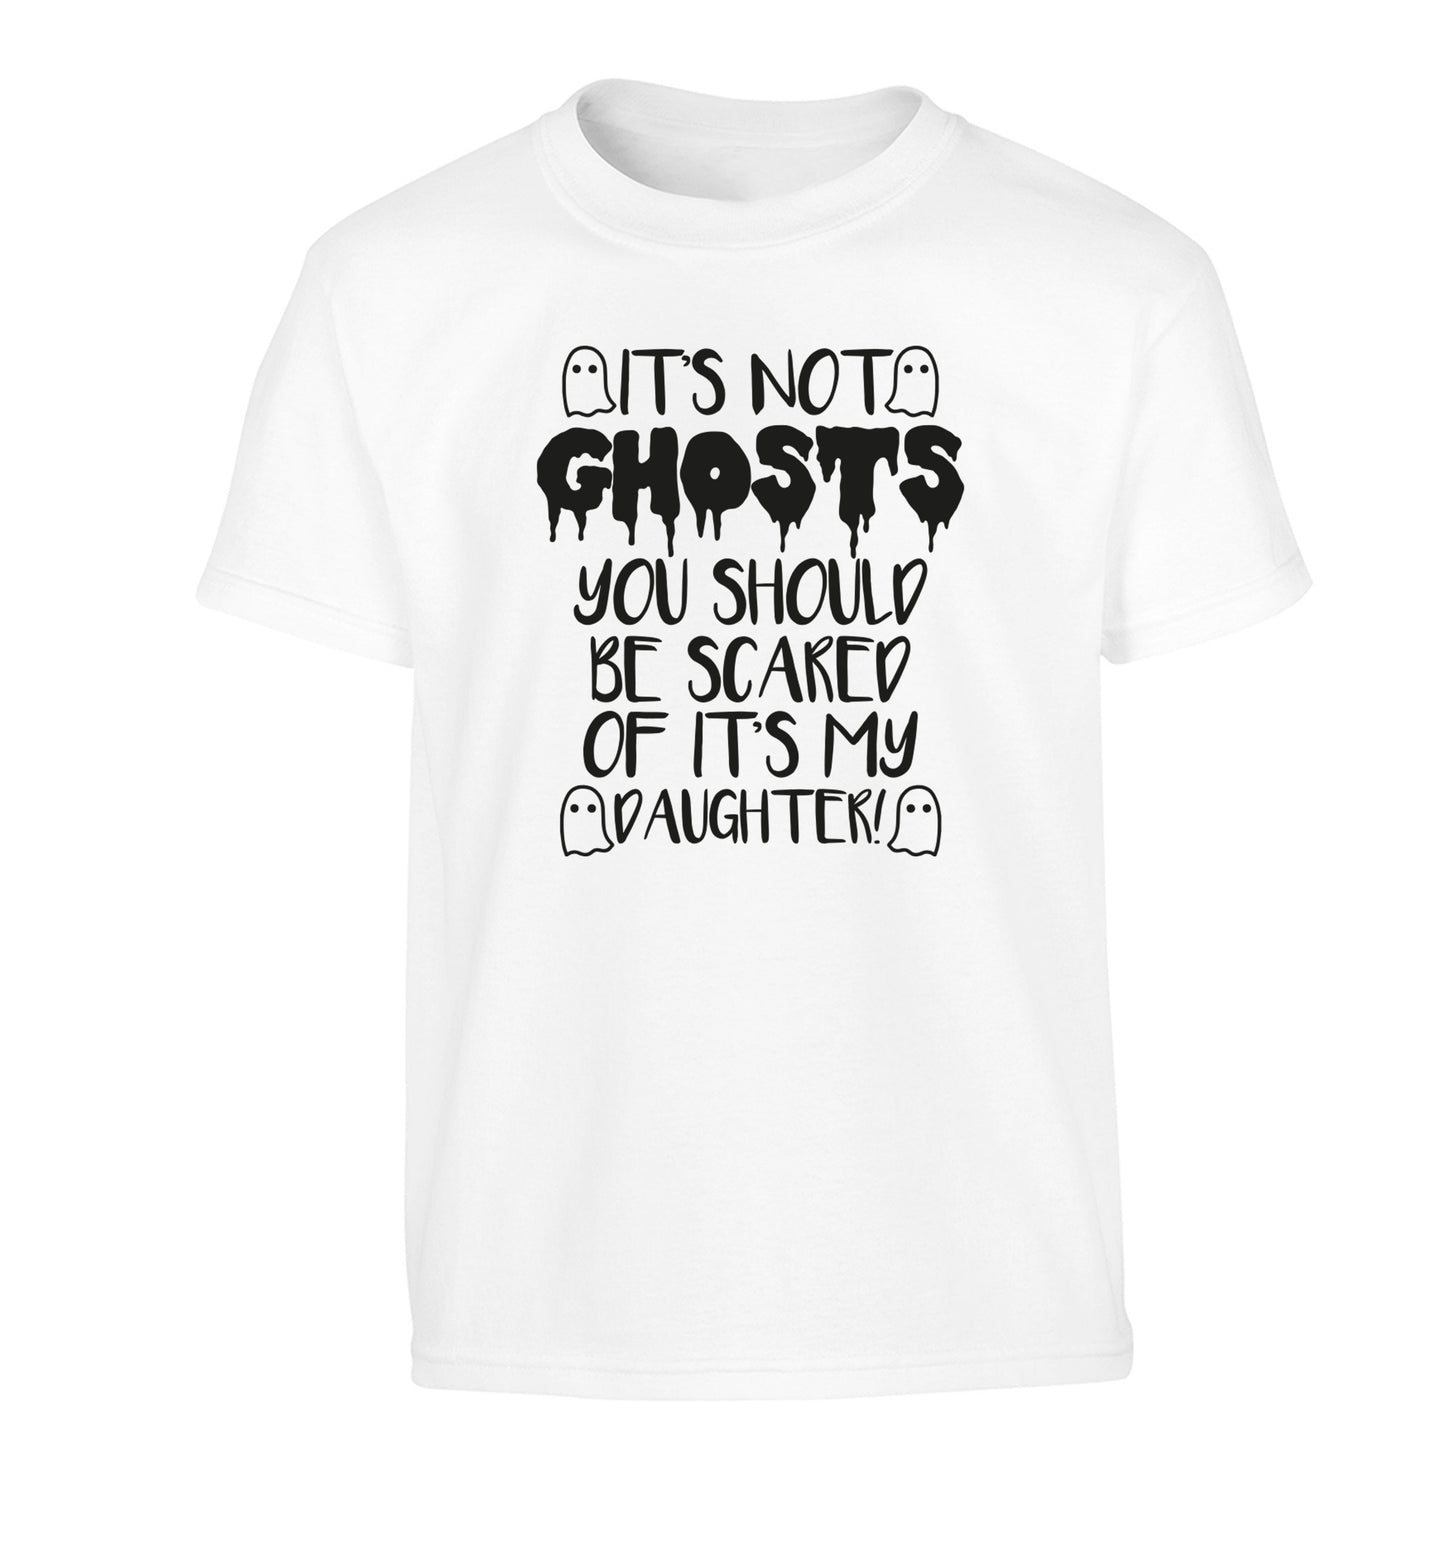 It's not ghosts you should be scared of it's my daughter! Children's white Tshirt 12-14 Years